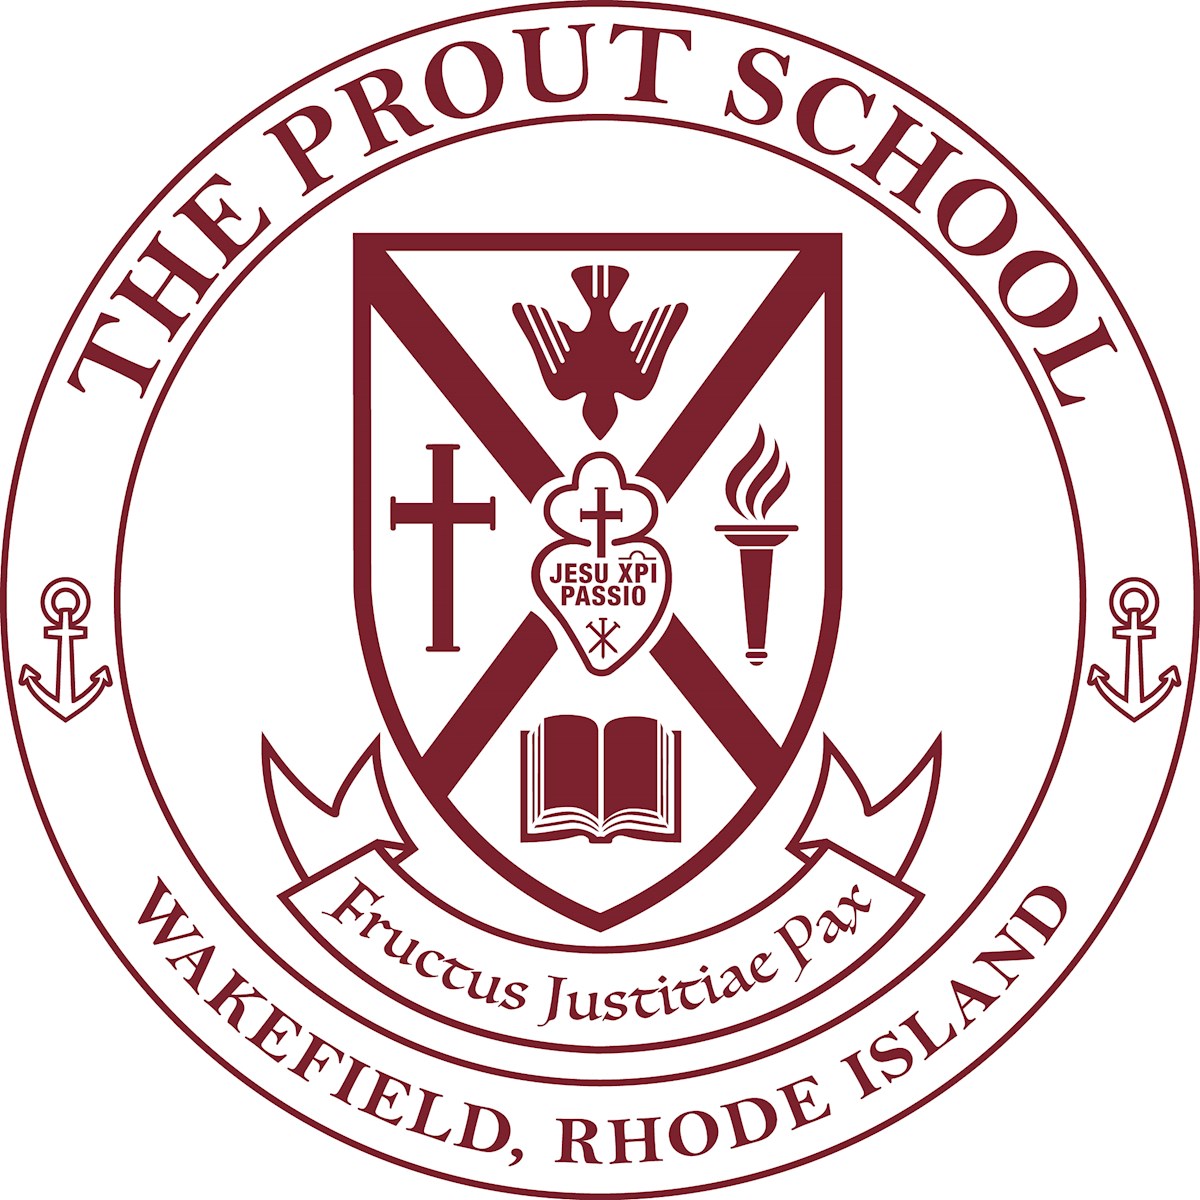 The Prout School - A Catholic, coeducational, college-prepatory, high school